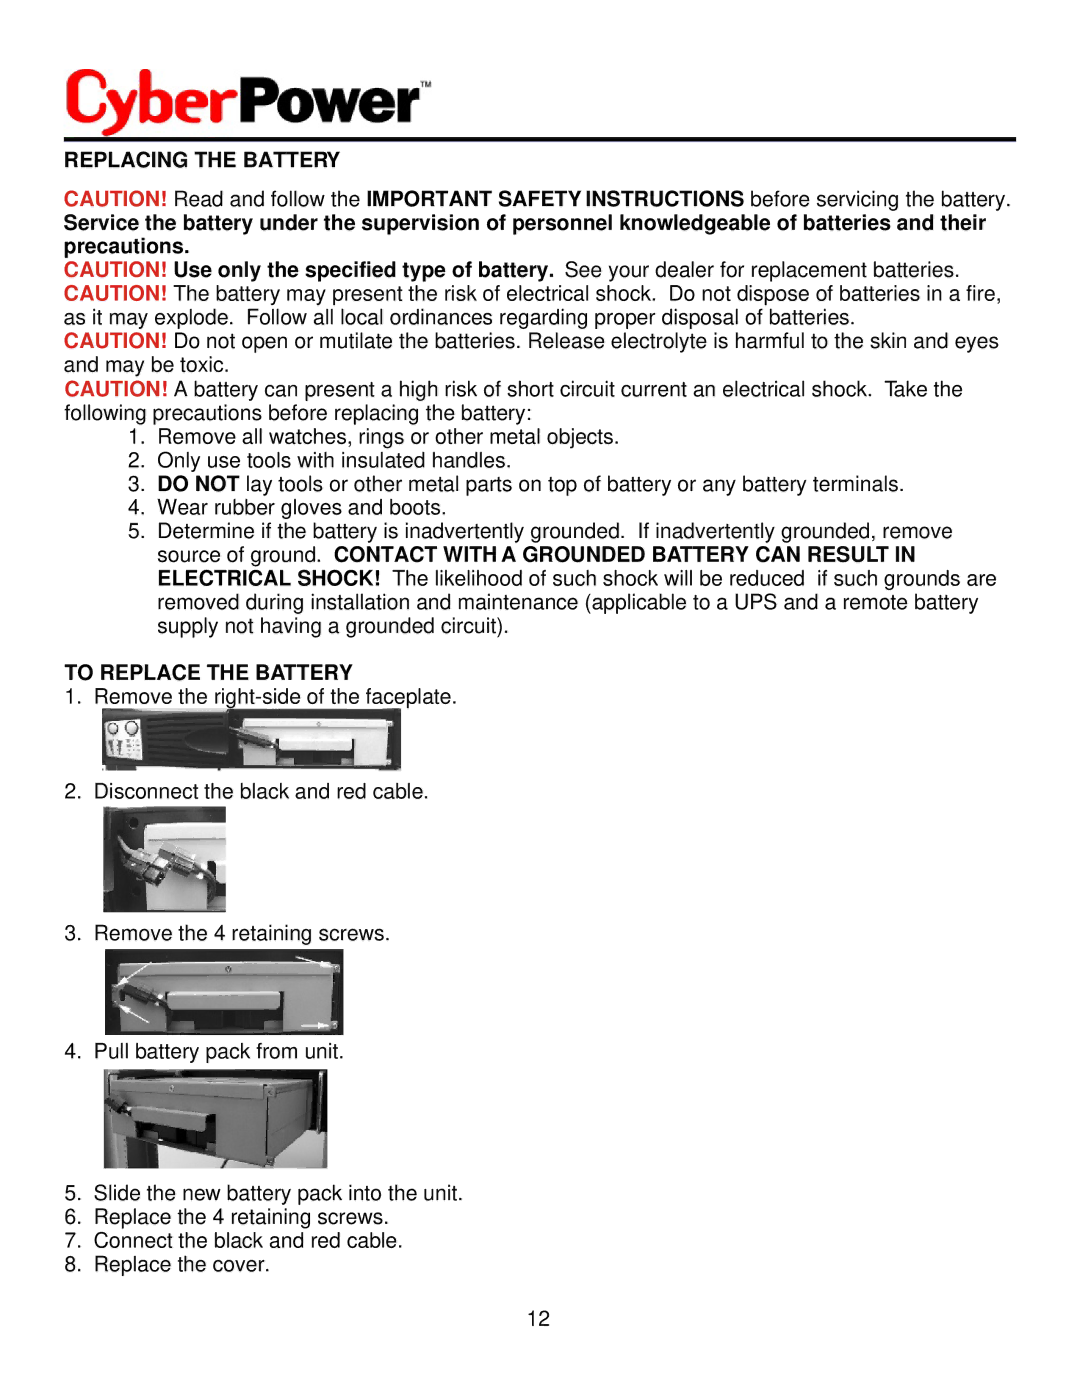 CyberPower Systems CPS1500AVR user manual Replacing the Battery, To Replace the Battery 